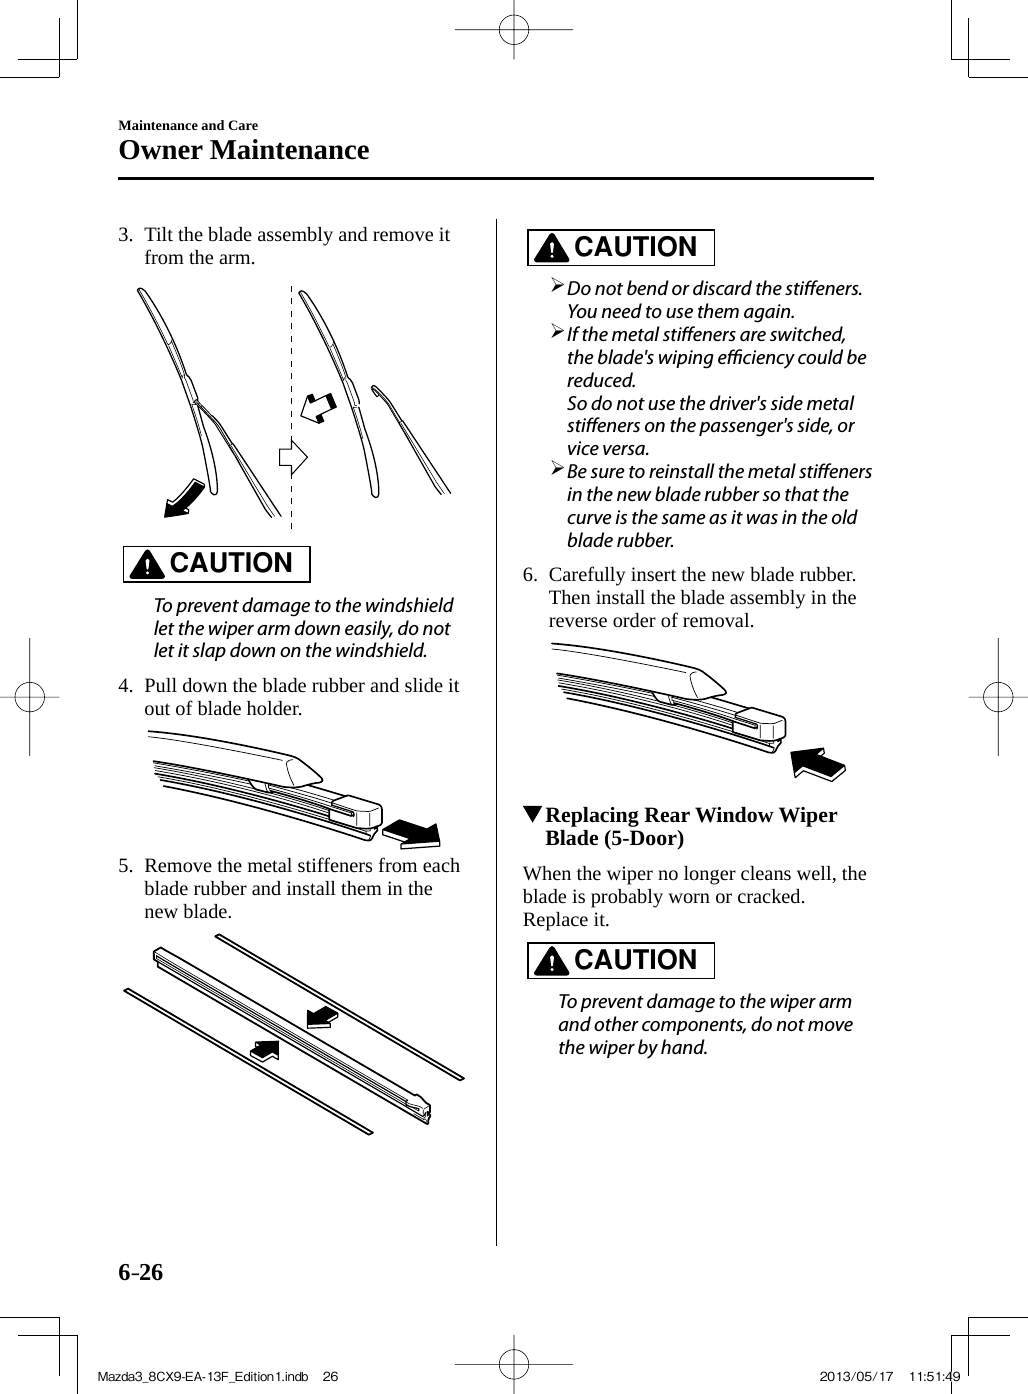 6–26Maintenance and CareOwner Maintenance   3.   Tilt the blade assembly and remove it from the arm.     CAUTION    To prevent damage to the windshield let the wiper arm down easily, do not let it slap down on the windshield.      4.   Pull down the blade rubber and slide it out of blade holder.     5.   Remove the metal stiffeners from each blade rubber and install them in the new blade.     CAUTION         Do not bend or discard the sti eners. You need to use them again.       If the metal sti eners are switched, the blade&apos;s wiping e  ciency could be reduced.    So do not use the driver&apos;s side metal sti eners on the passenger&apos;s side, or vice versa.       Be sure to reinstall the metal sti eners in the new blade rubber so that the curve is the same as it was in the old blade rubber.        6.   Carefully insert the new blade rubber. Then install the blade assembly in the reverse order of removal.              Replacing Rear Window Wiper Blade (5-Door)            When  the  wiper  no  longer  cleans  well,  the blade is probably worn or cracked.  Replace  it.   CAUTION    To prevent damage to the wiper arm and other components, do not move the wiper by hand.   Mazda3_8CX9-EA-13F_Edition1.indb   26Mazda3_8CX9-EA-13F_Edition1.indb   26 2013/05/17   11:51:492013/05/17   11:51:49